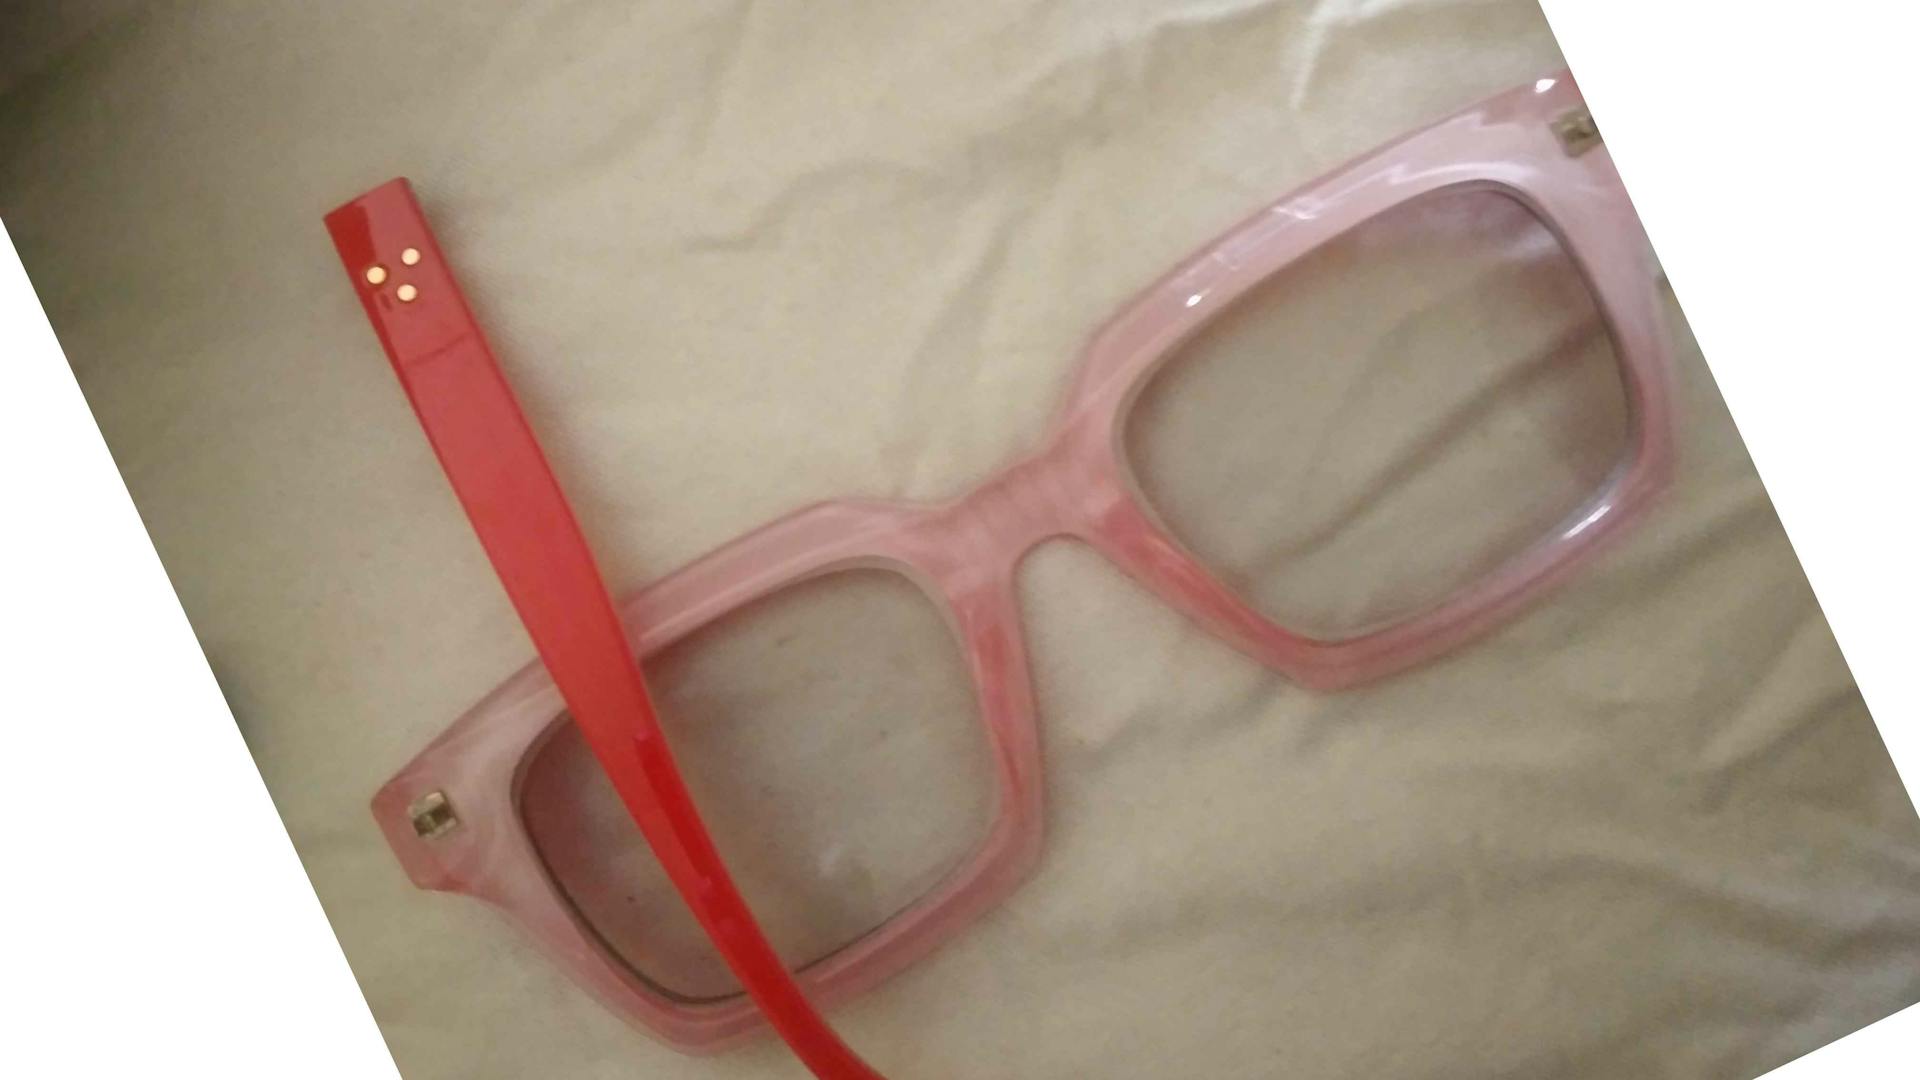 Red square framed glasses, lying on their lenses, with the handles broken off and one handle resting on the left side.